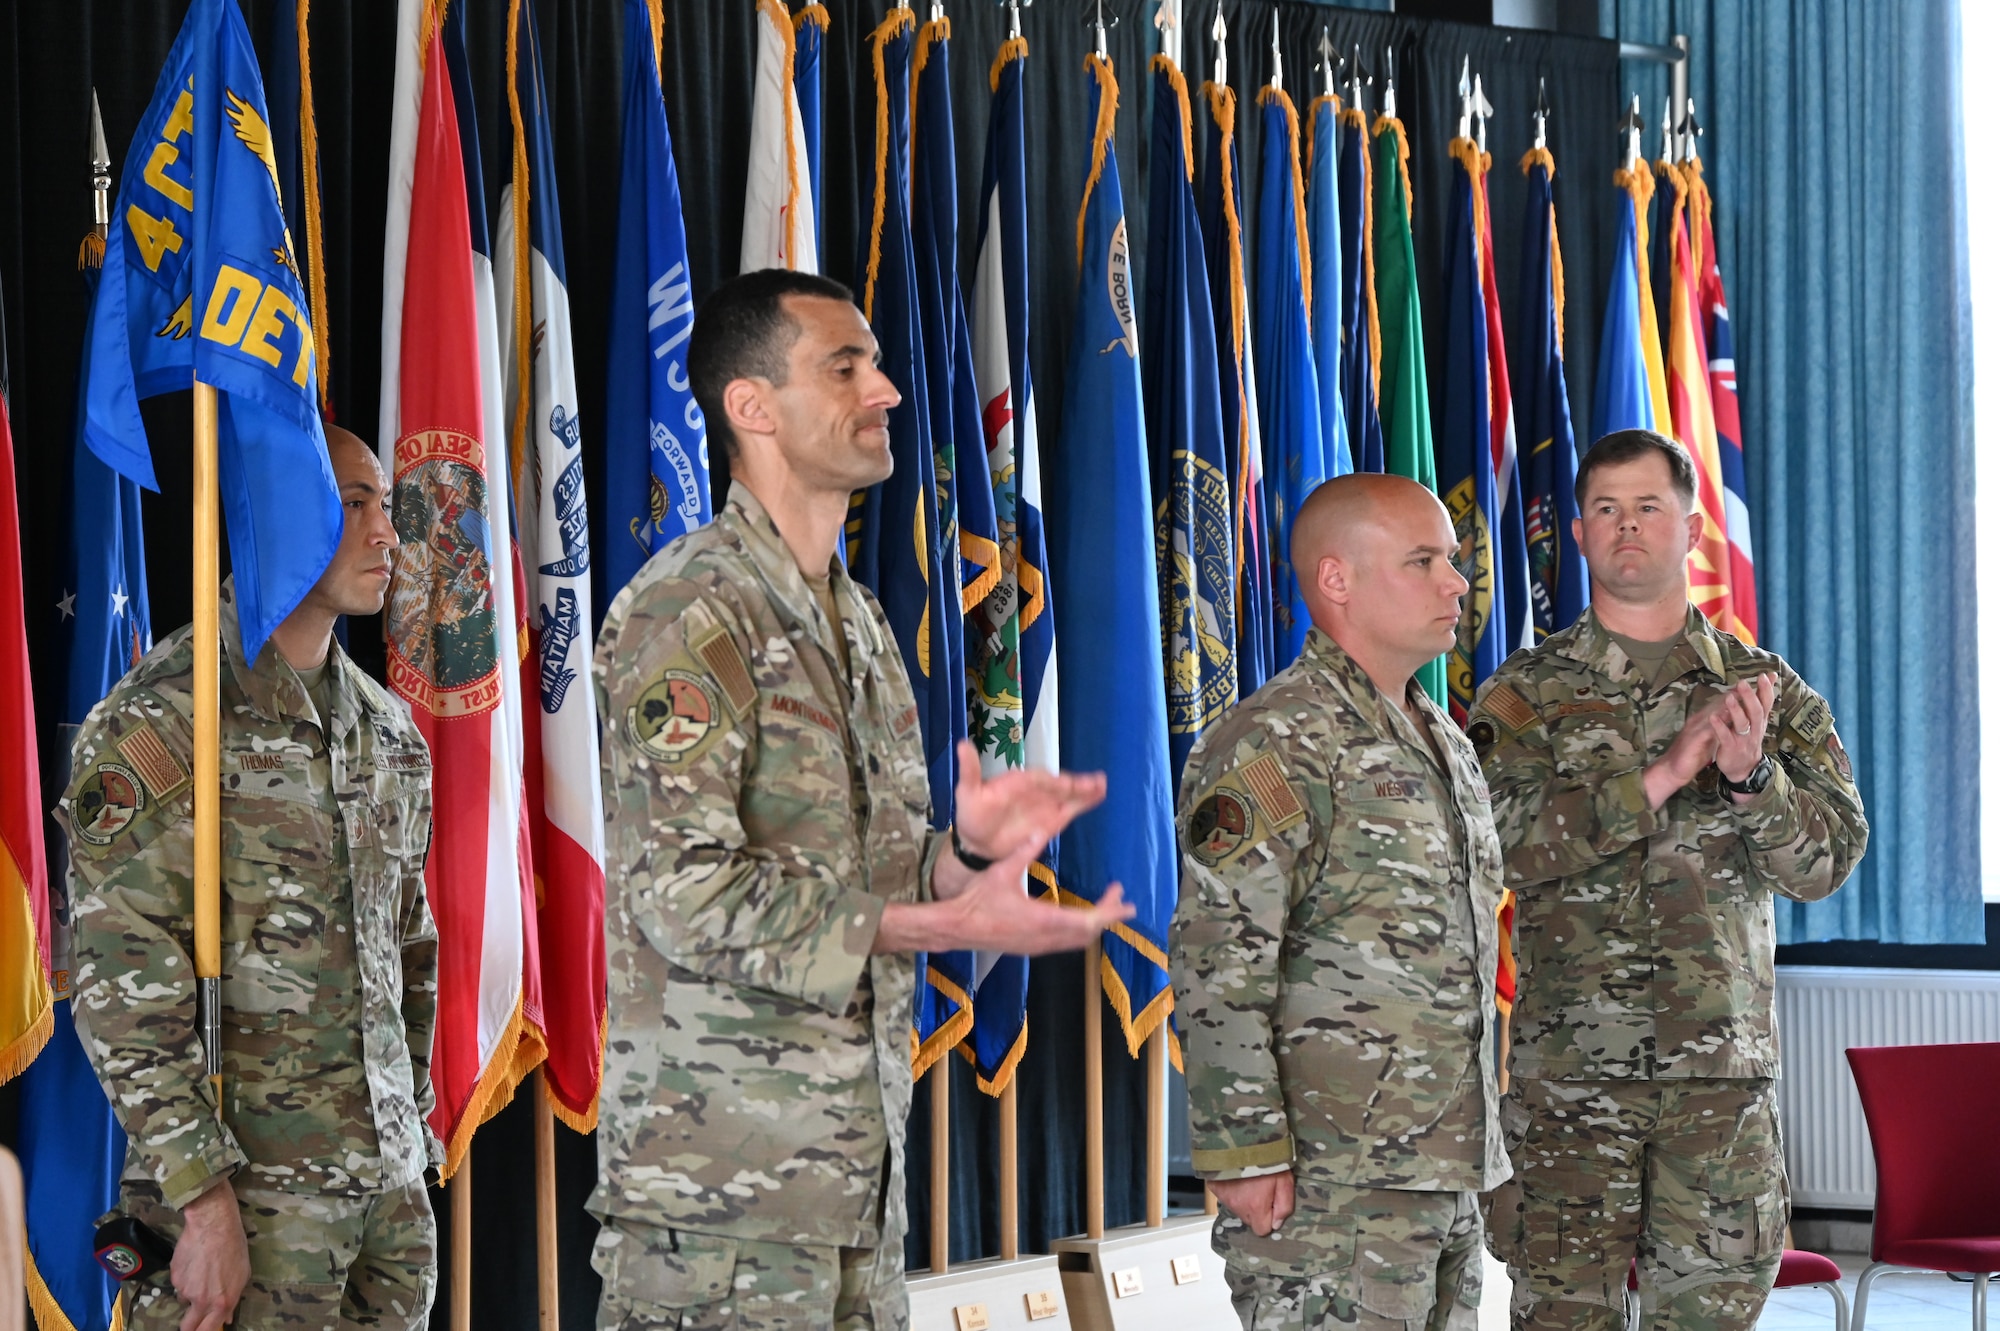 Everyone in attendance congratulates and welcomes Maj William West as the incoming commander to the 4th Combat Training Squadron's Detachment 1.